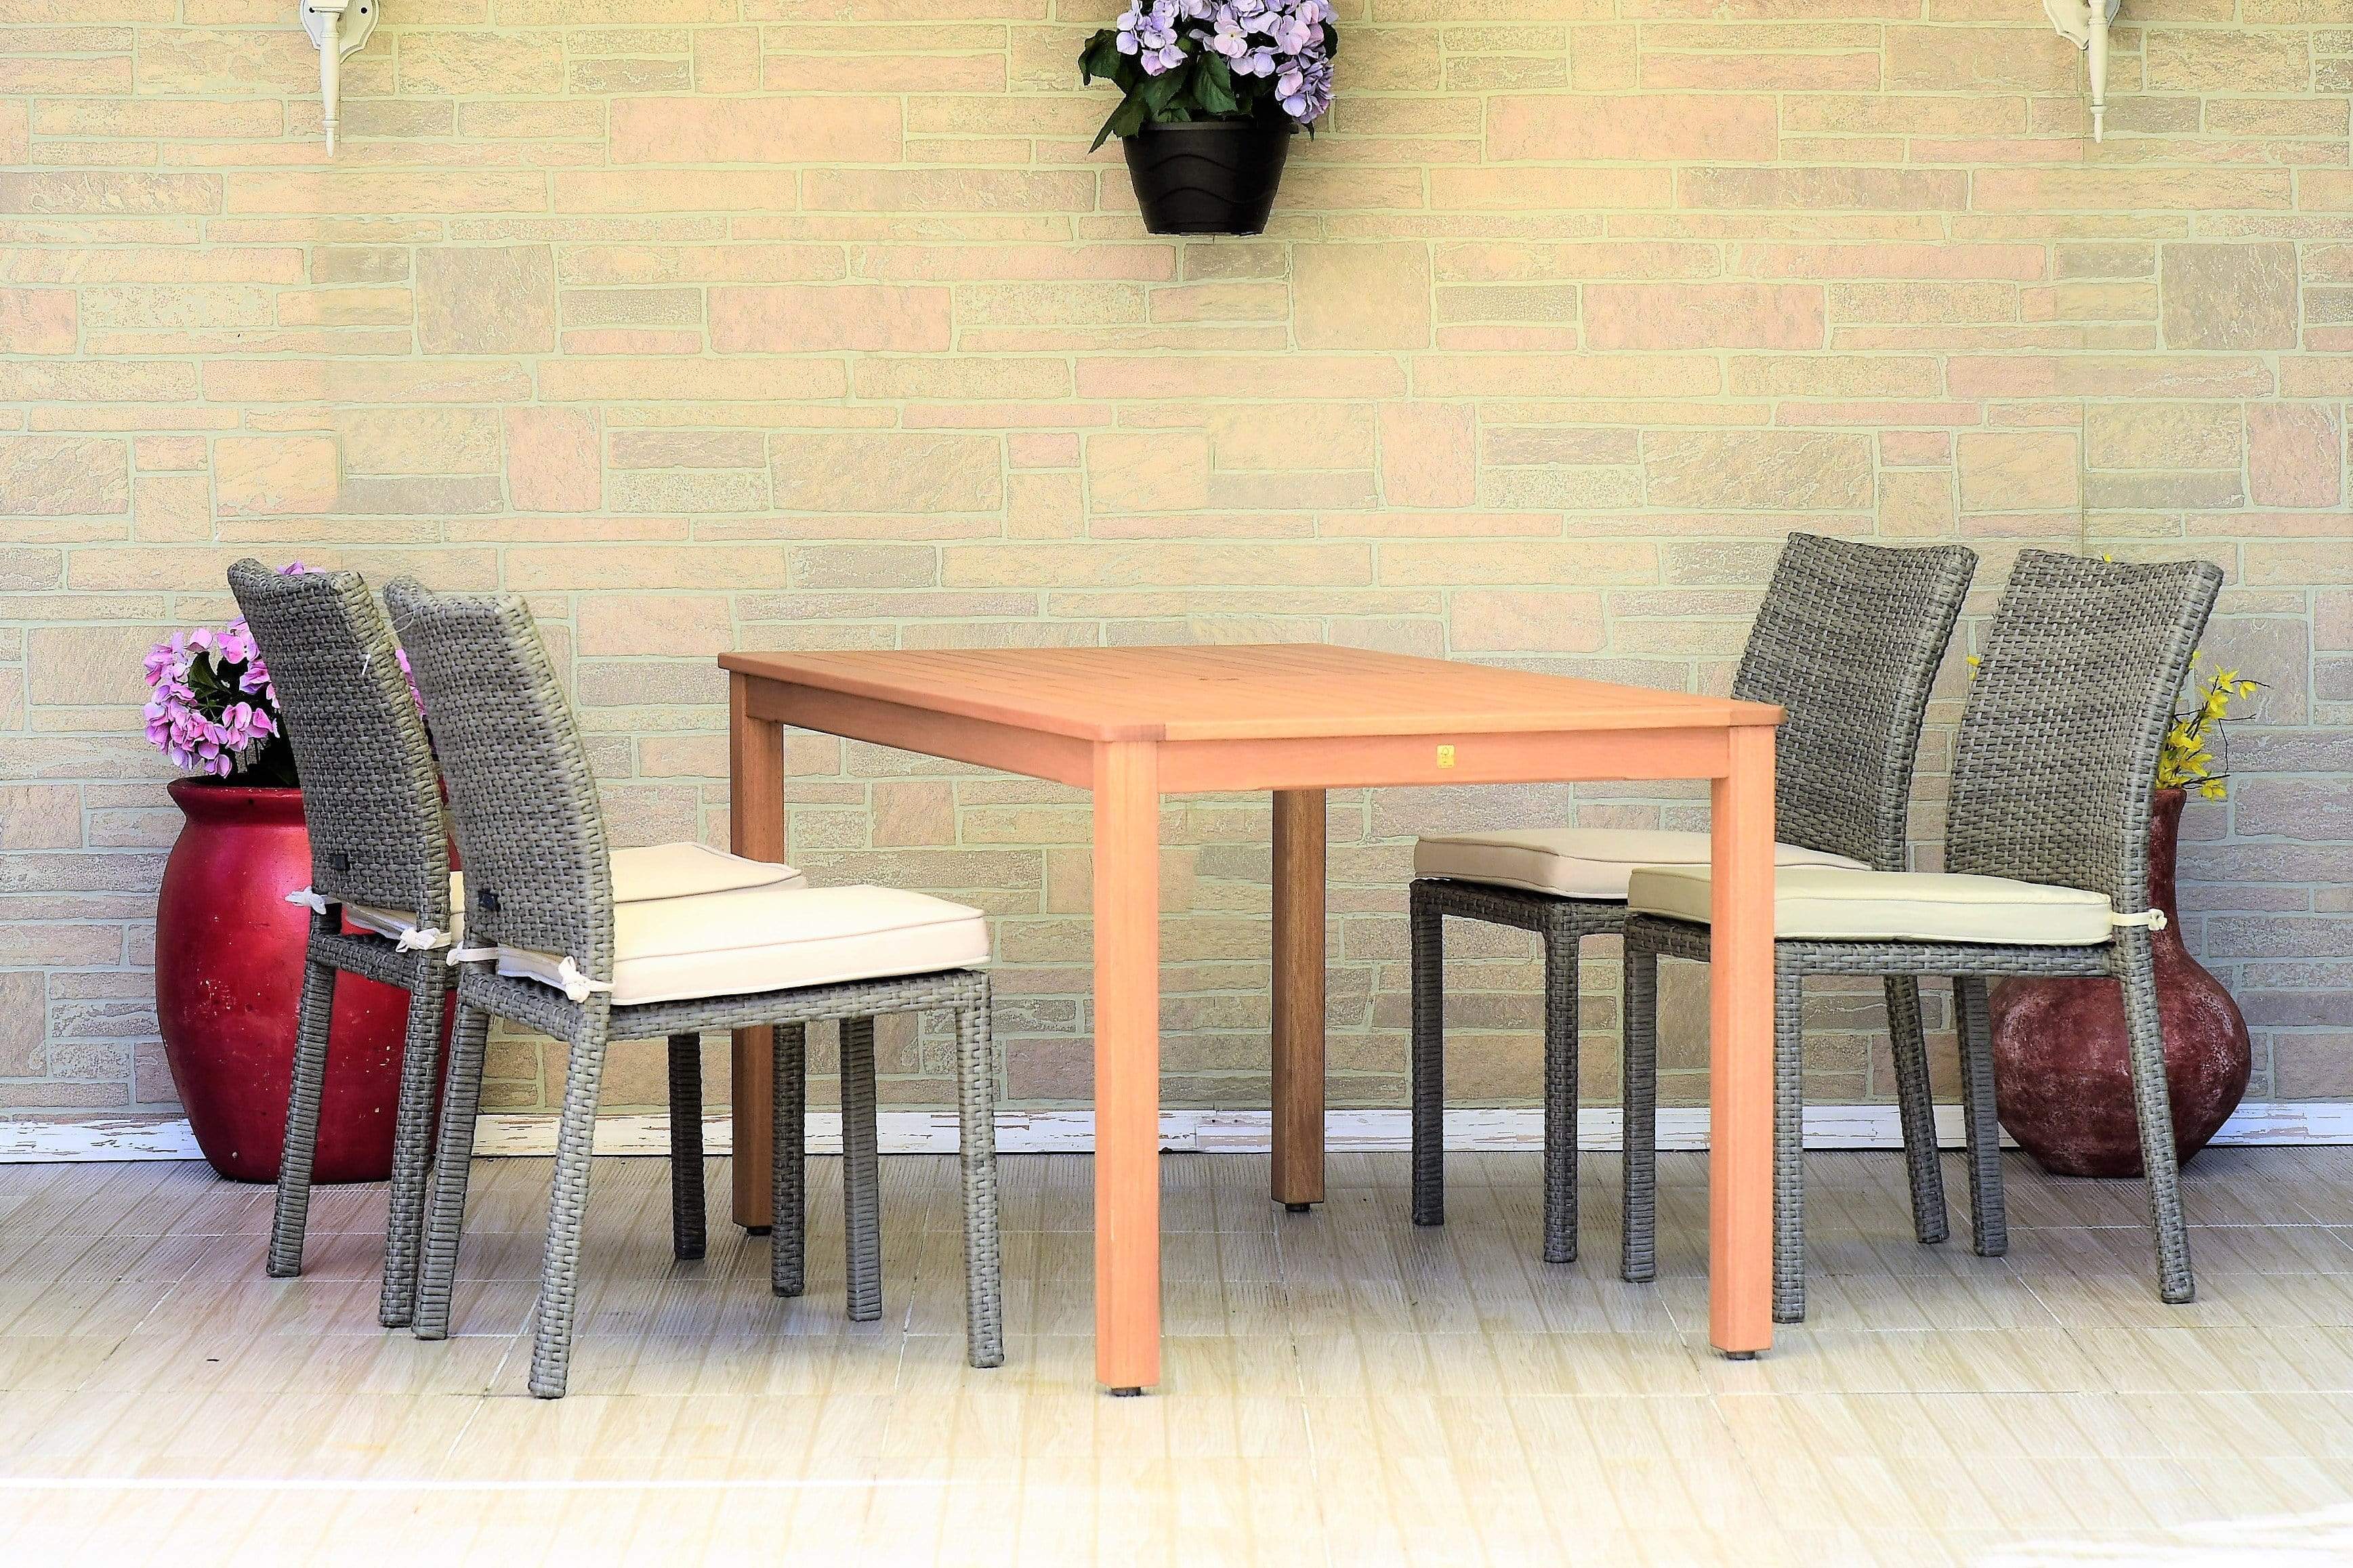 Amazonia Outdoor Teak Dining Set Amazonia Brooklyn 5 Piece Rectangular Eucalyptus Patio Dining set | Teak Finish and Grey Wicker Chairs | Durable and Ideal for Outdoors ORLRECLOT_4LIBSDGROW